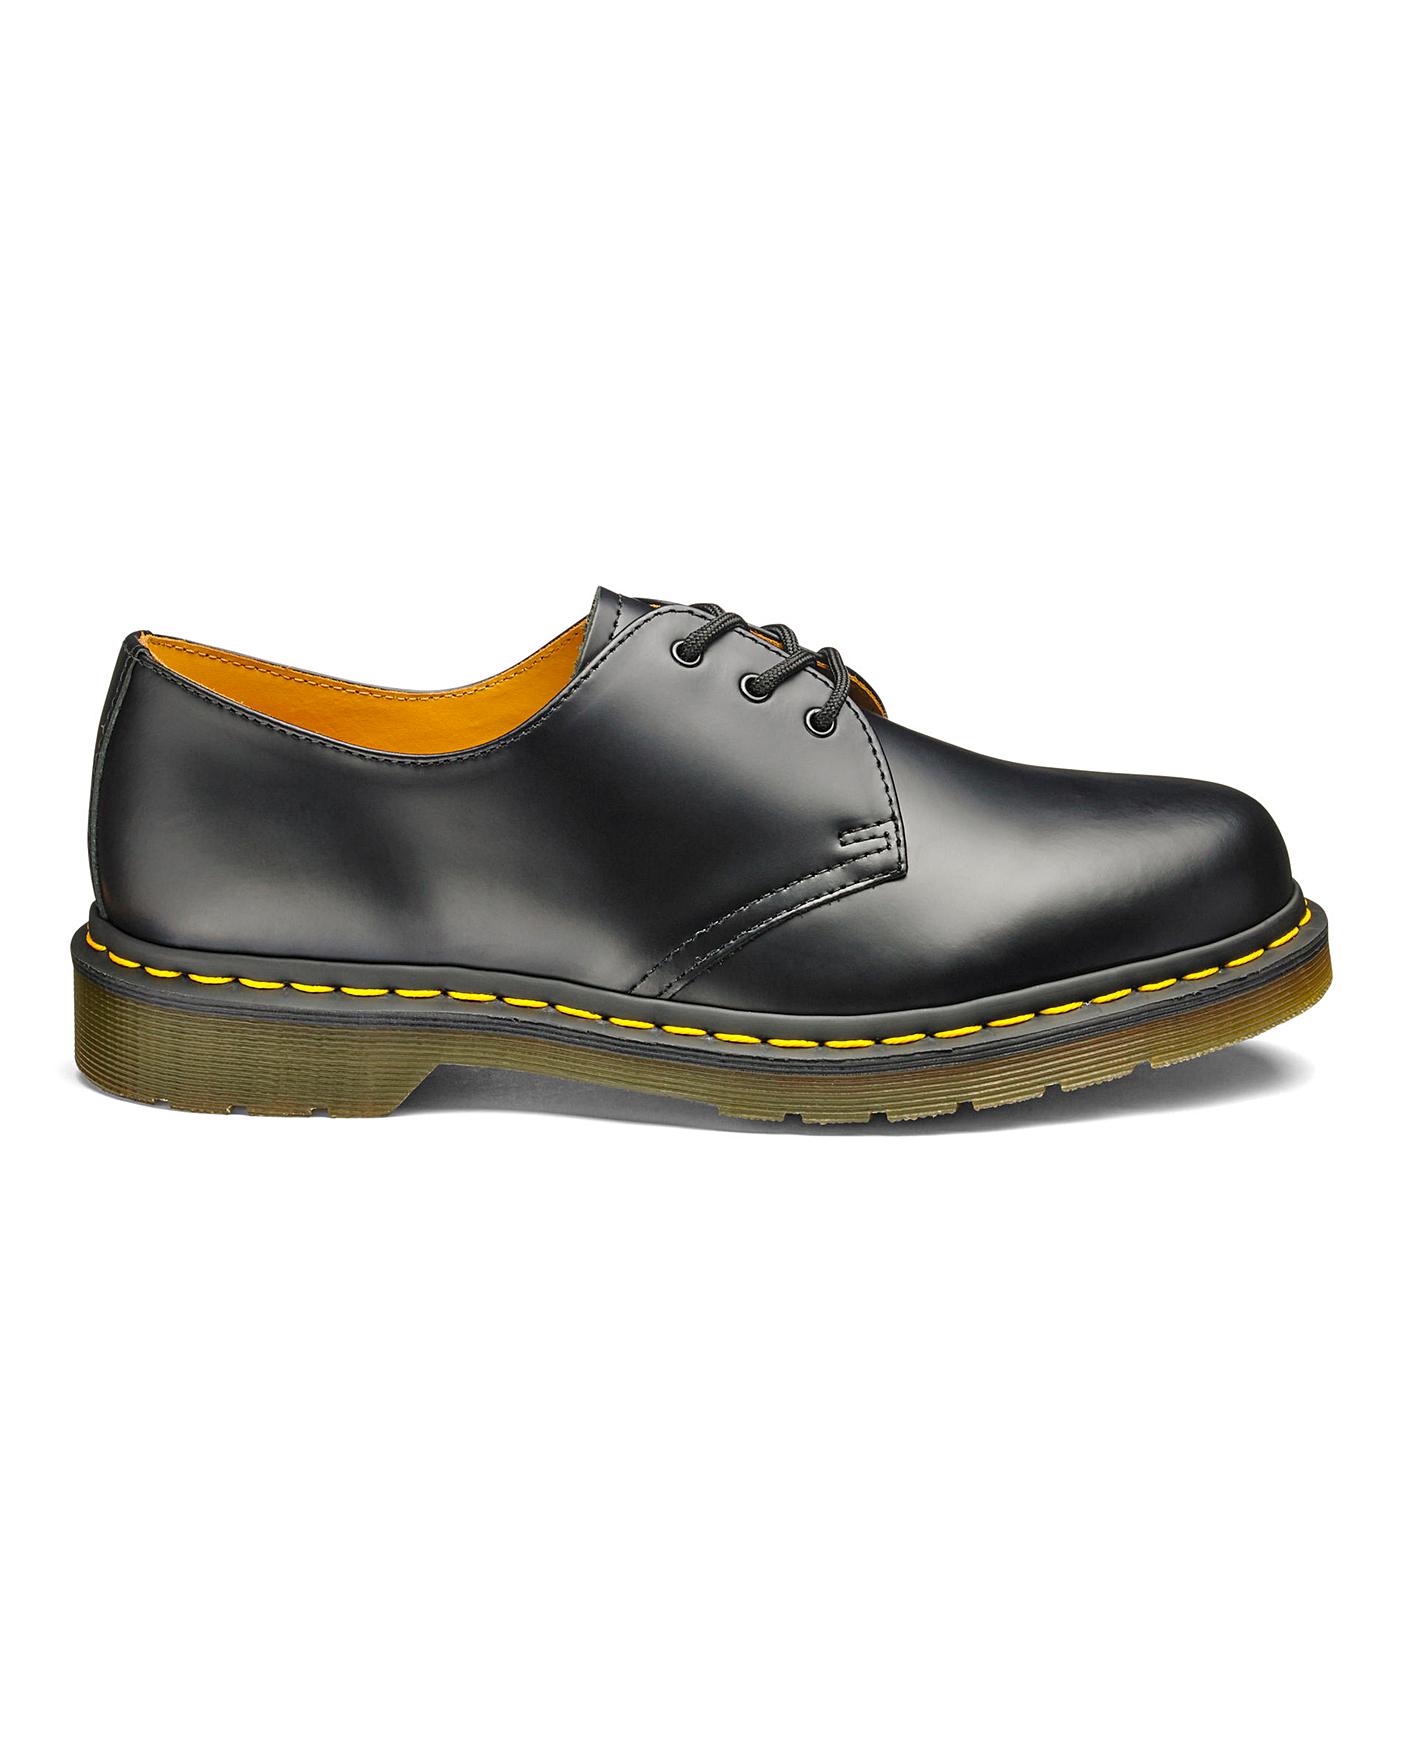 dr martens gibson shoes